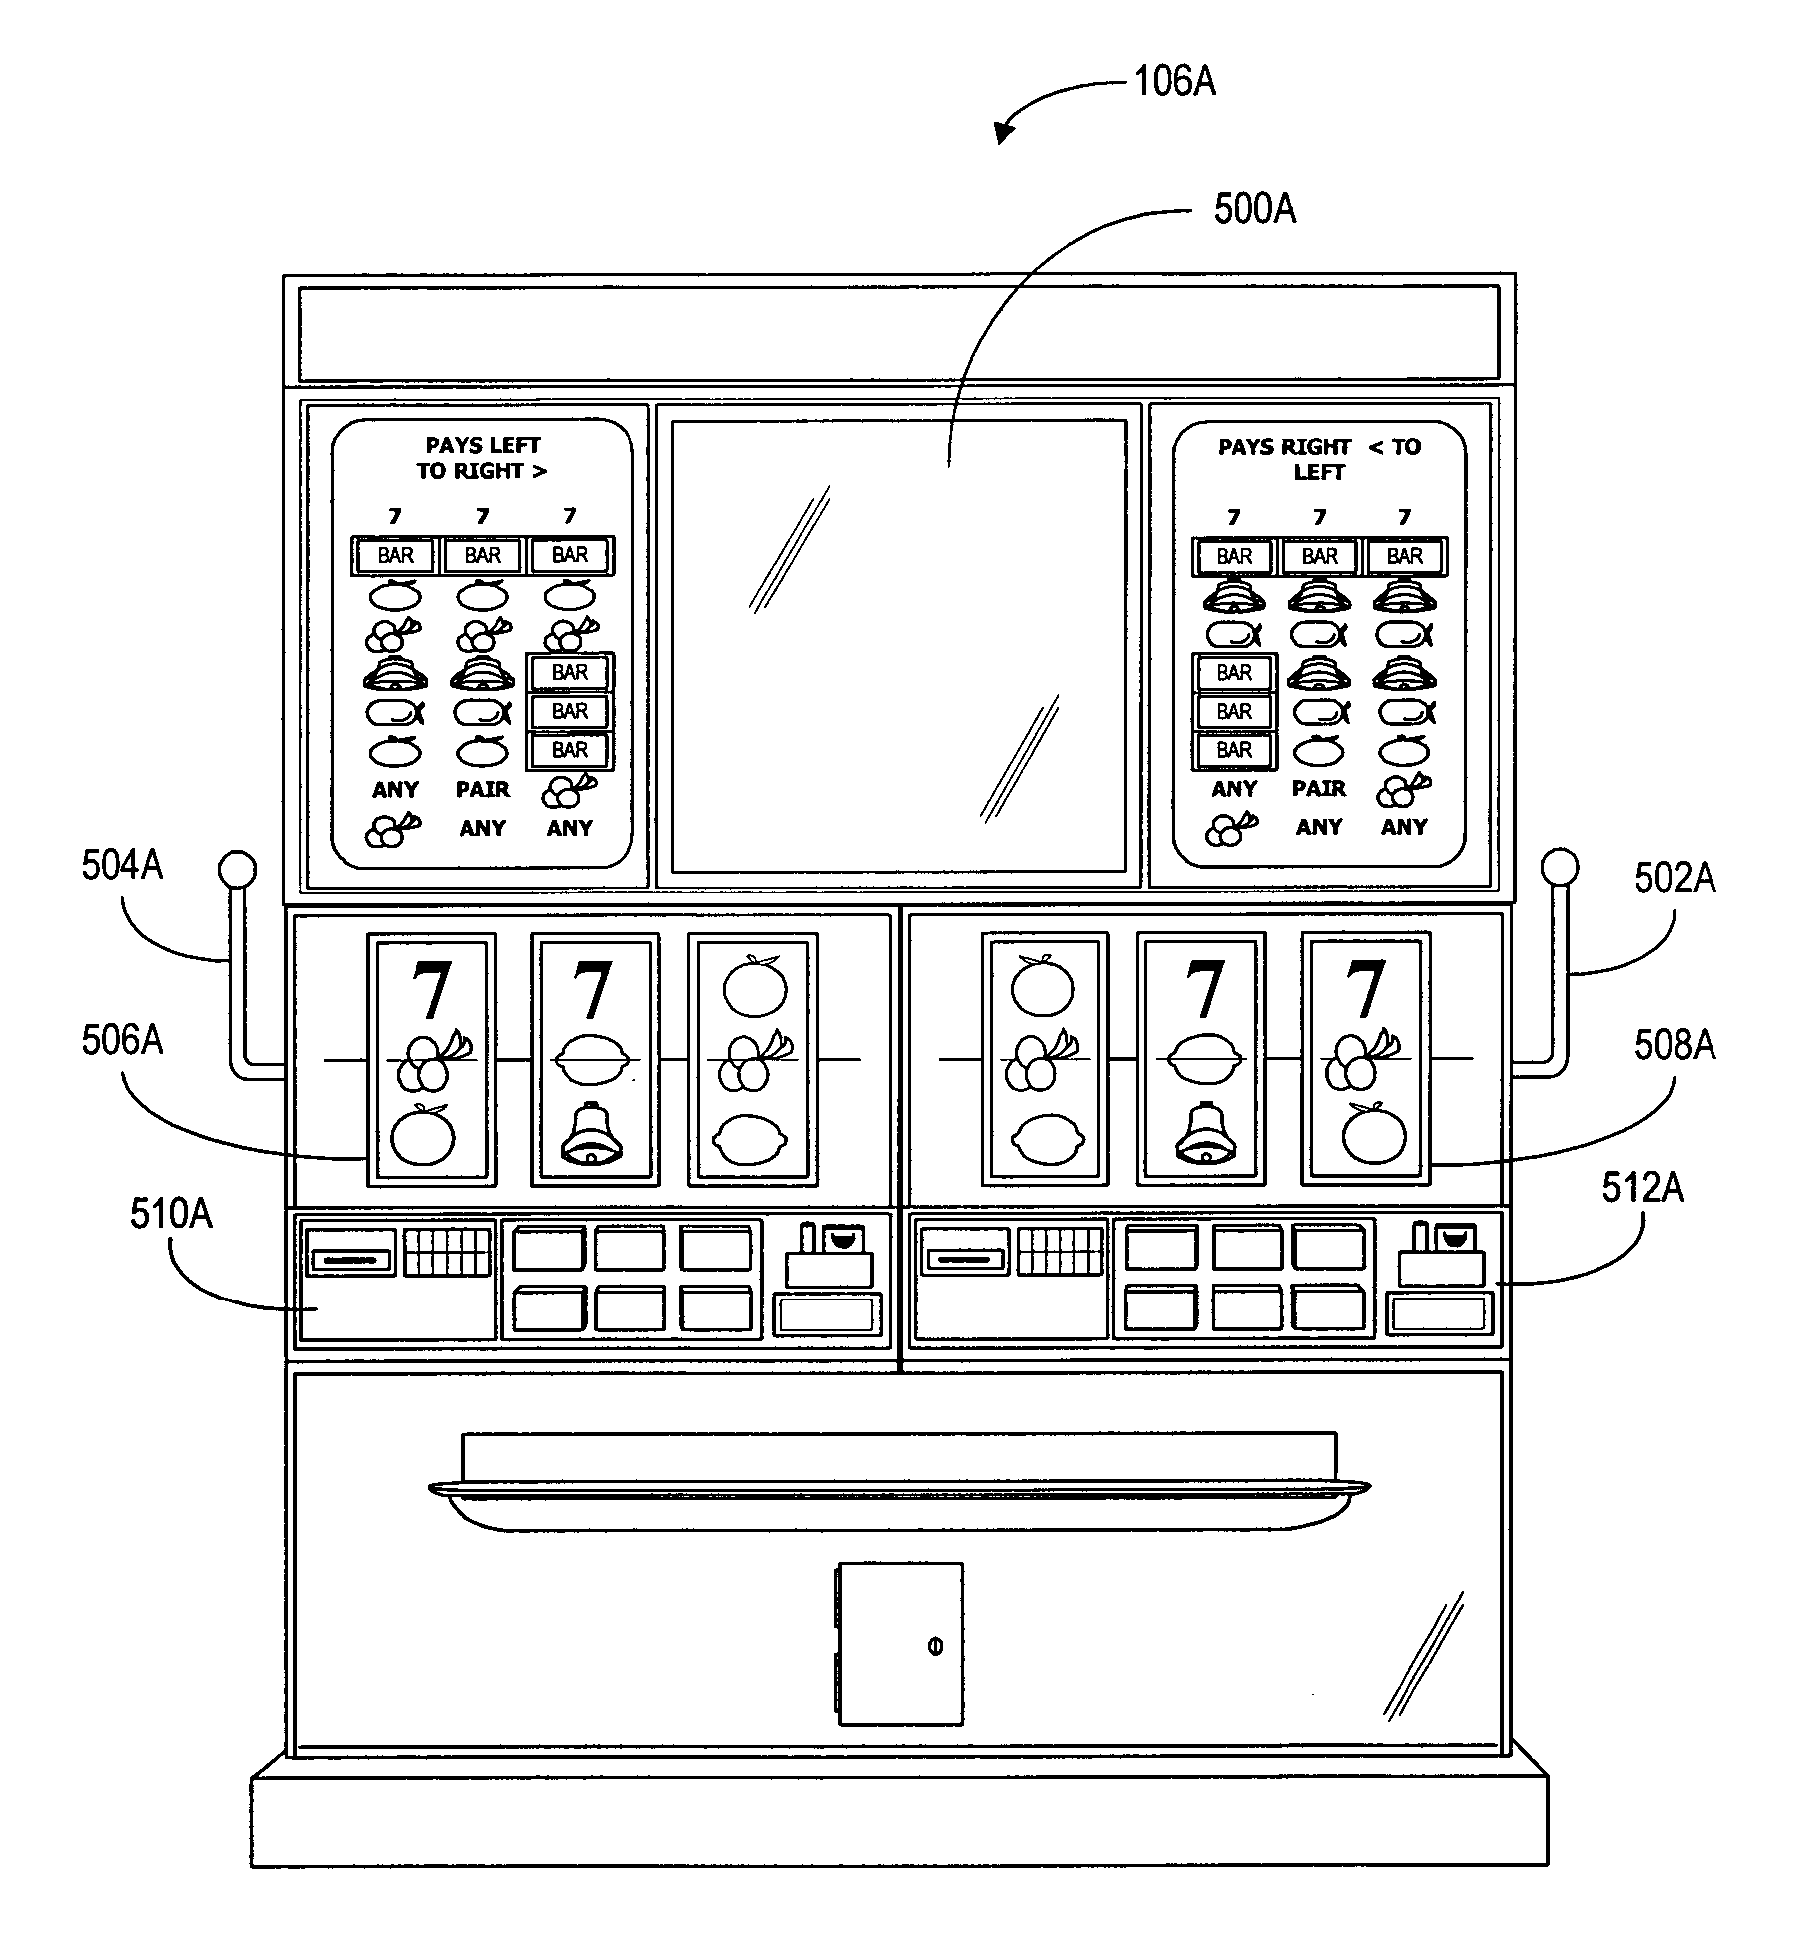 Multiplayer gaming device and methods